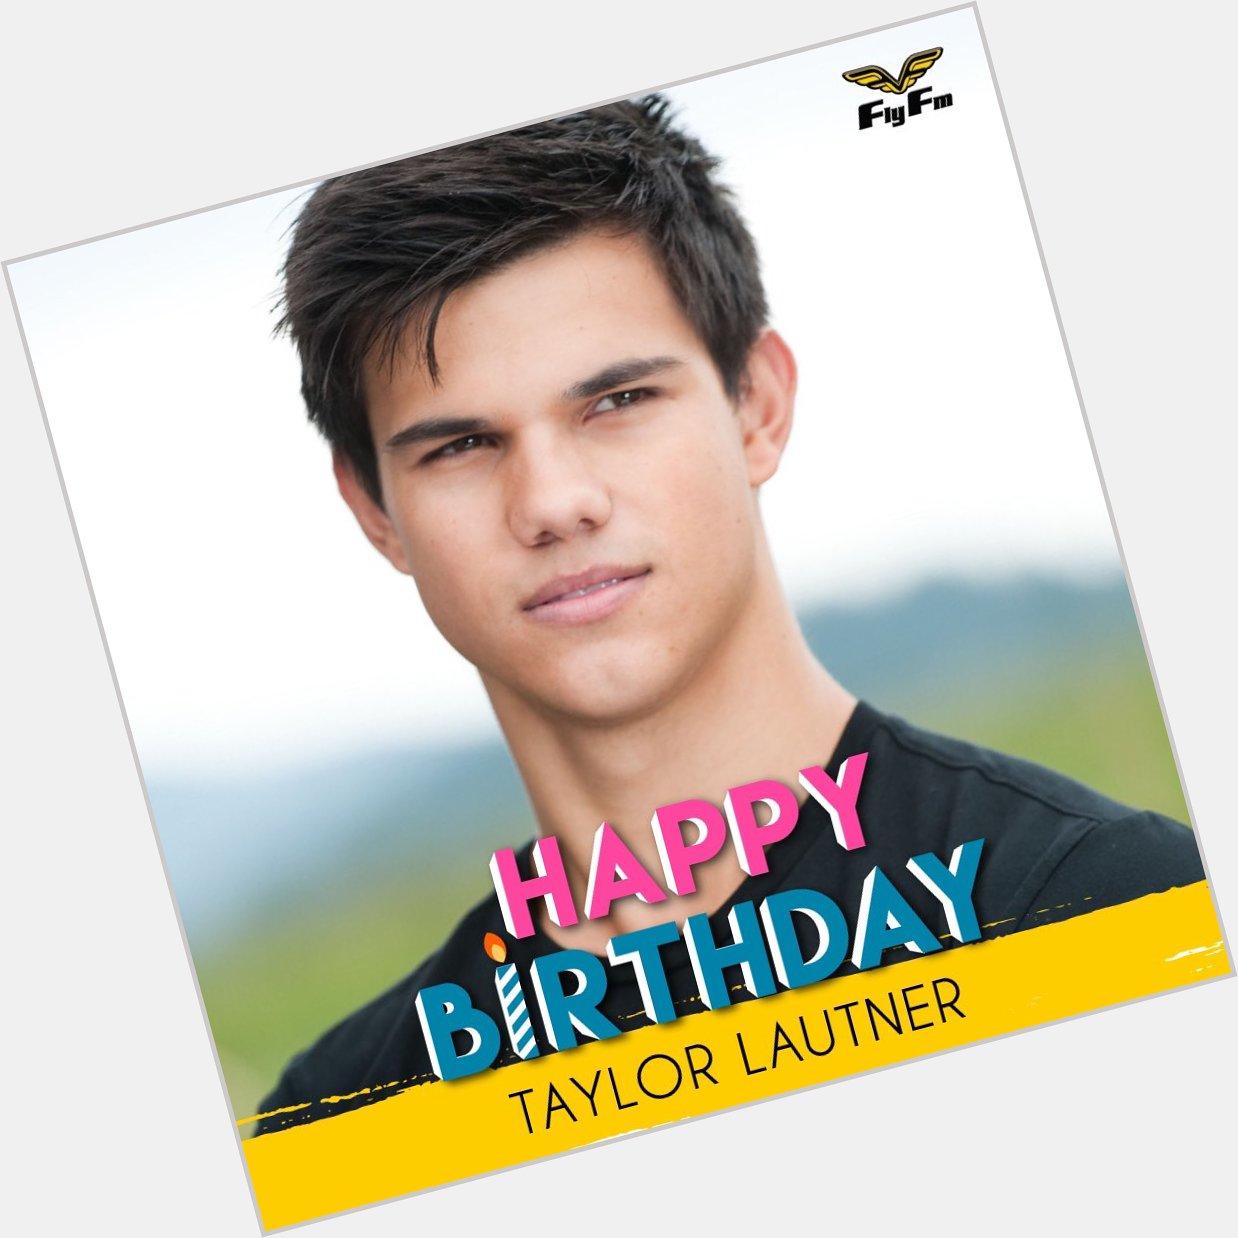 Who has always been on It\s Taylor Lautner\s birthday!! A very HAPPY 25th BIRTHDAY to the actor!! 